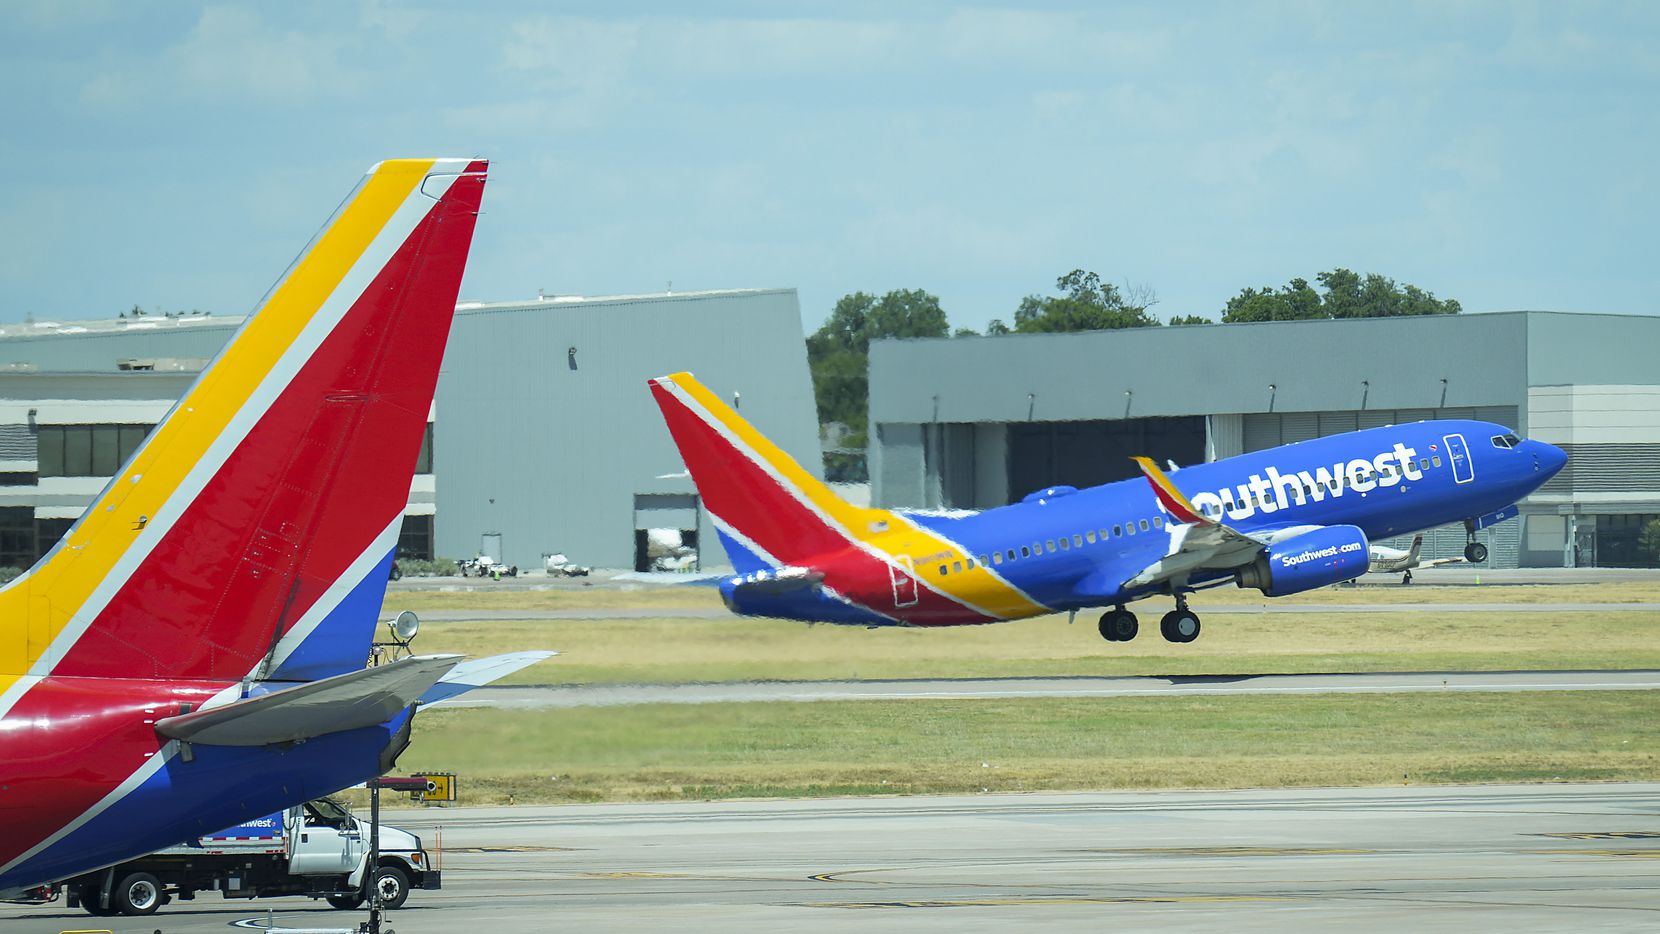 A Southwest Airlines plane took off at Dallas Love Field Airport on July 25, 2022.